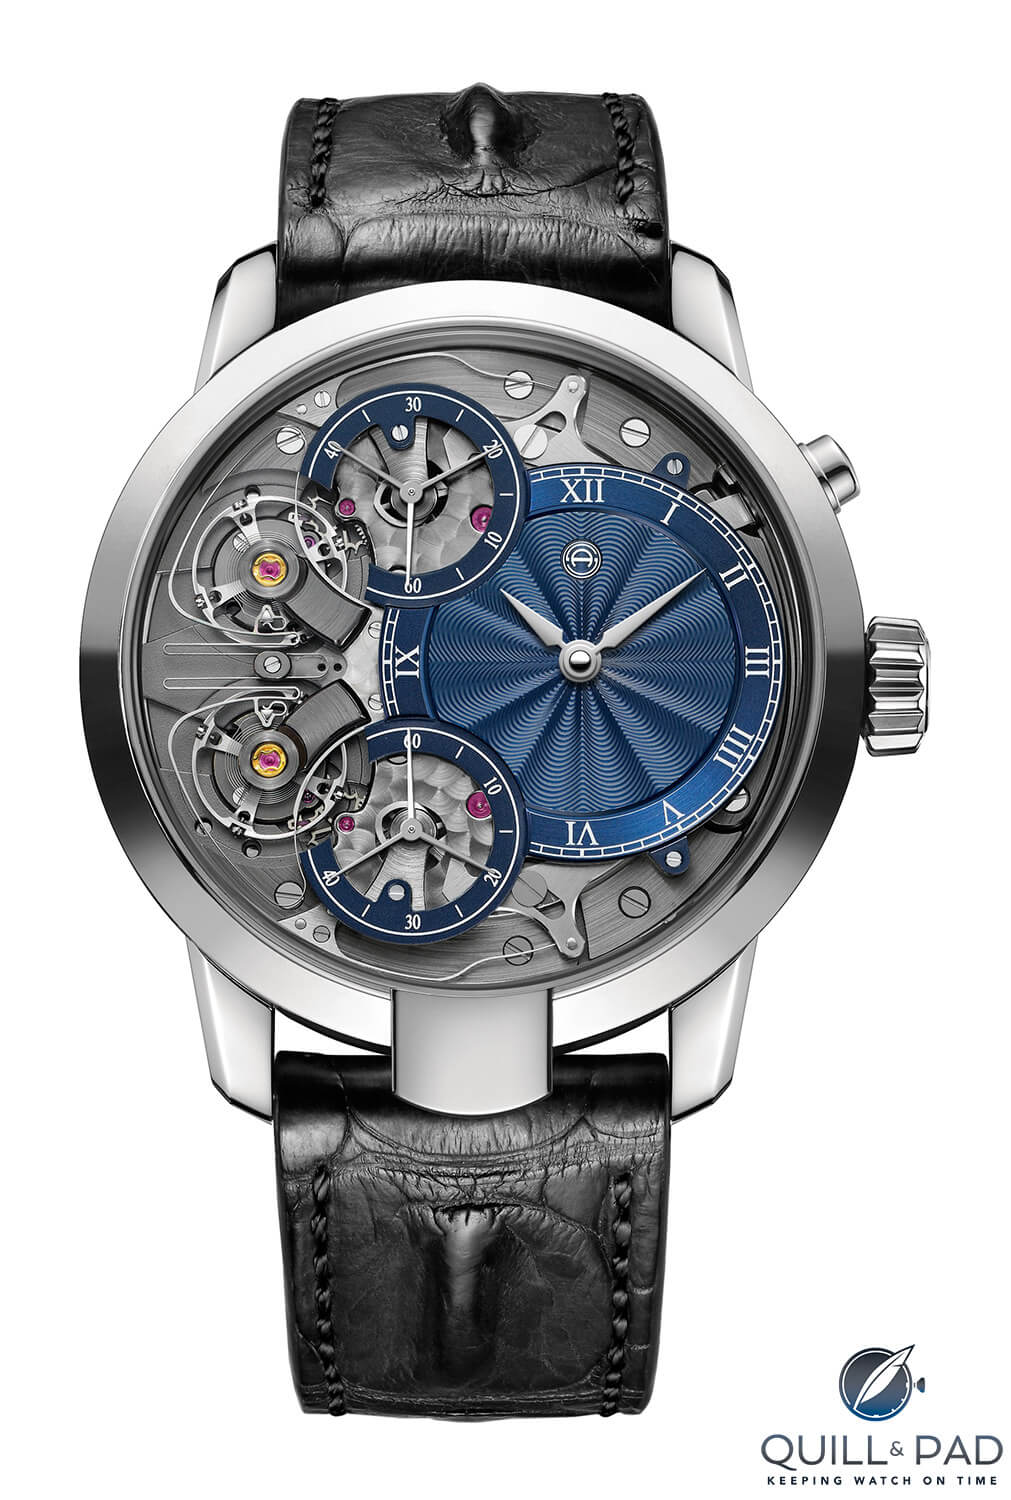 Armin Strom Mirrored Force Resonance with guilloche dial